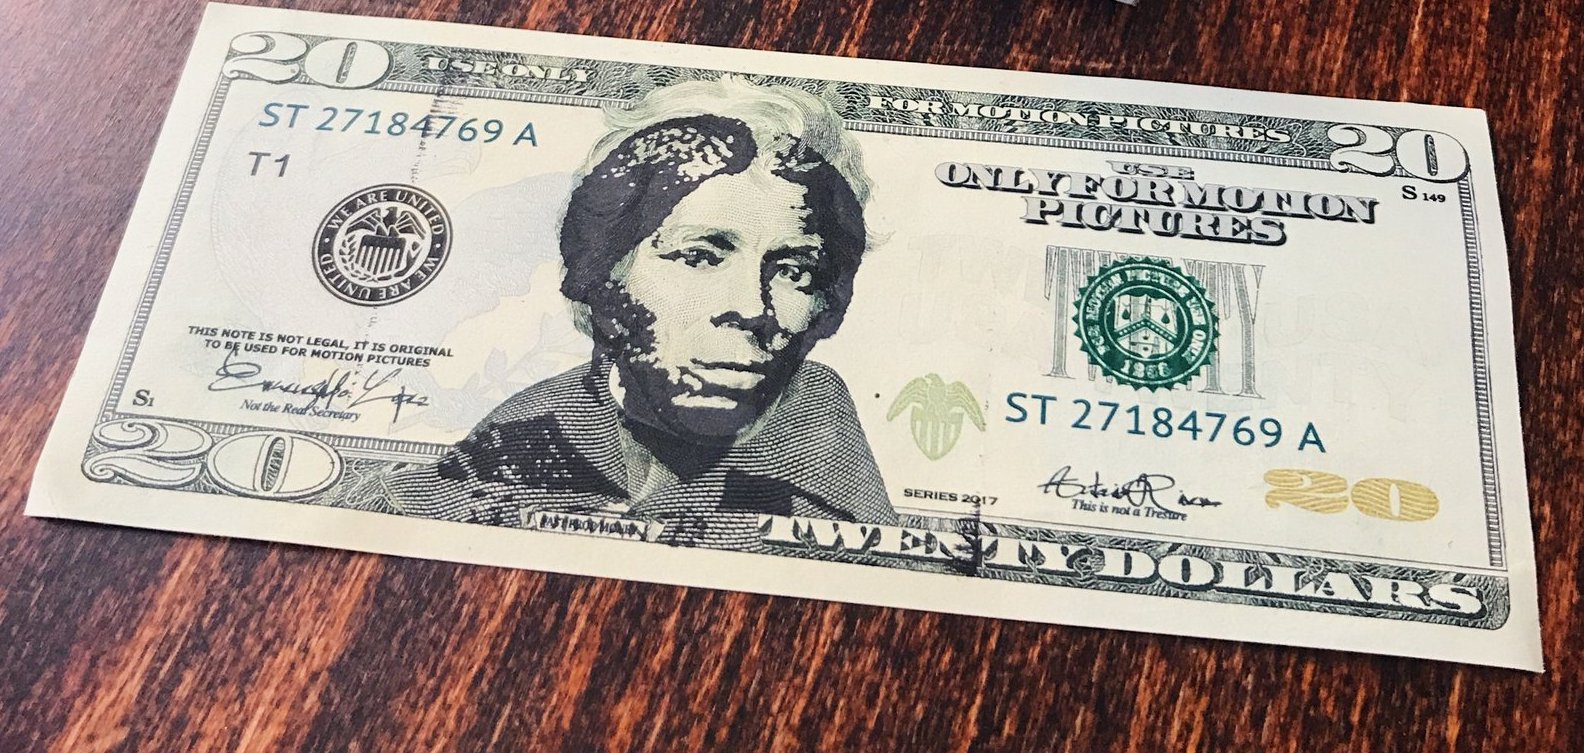 The Trump Admin Is Avoiding Putting Harriet Tubman On The $20 Bill, So This Artist Found A Way To Do It Anyway